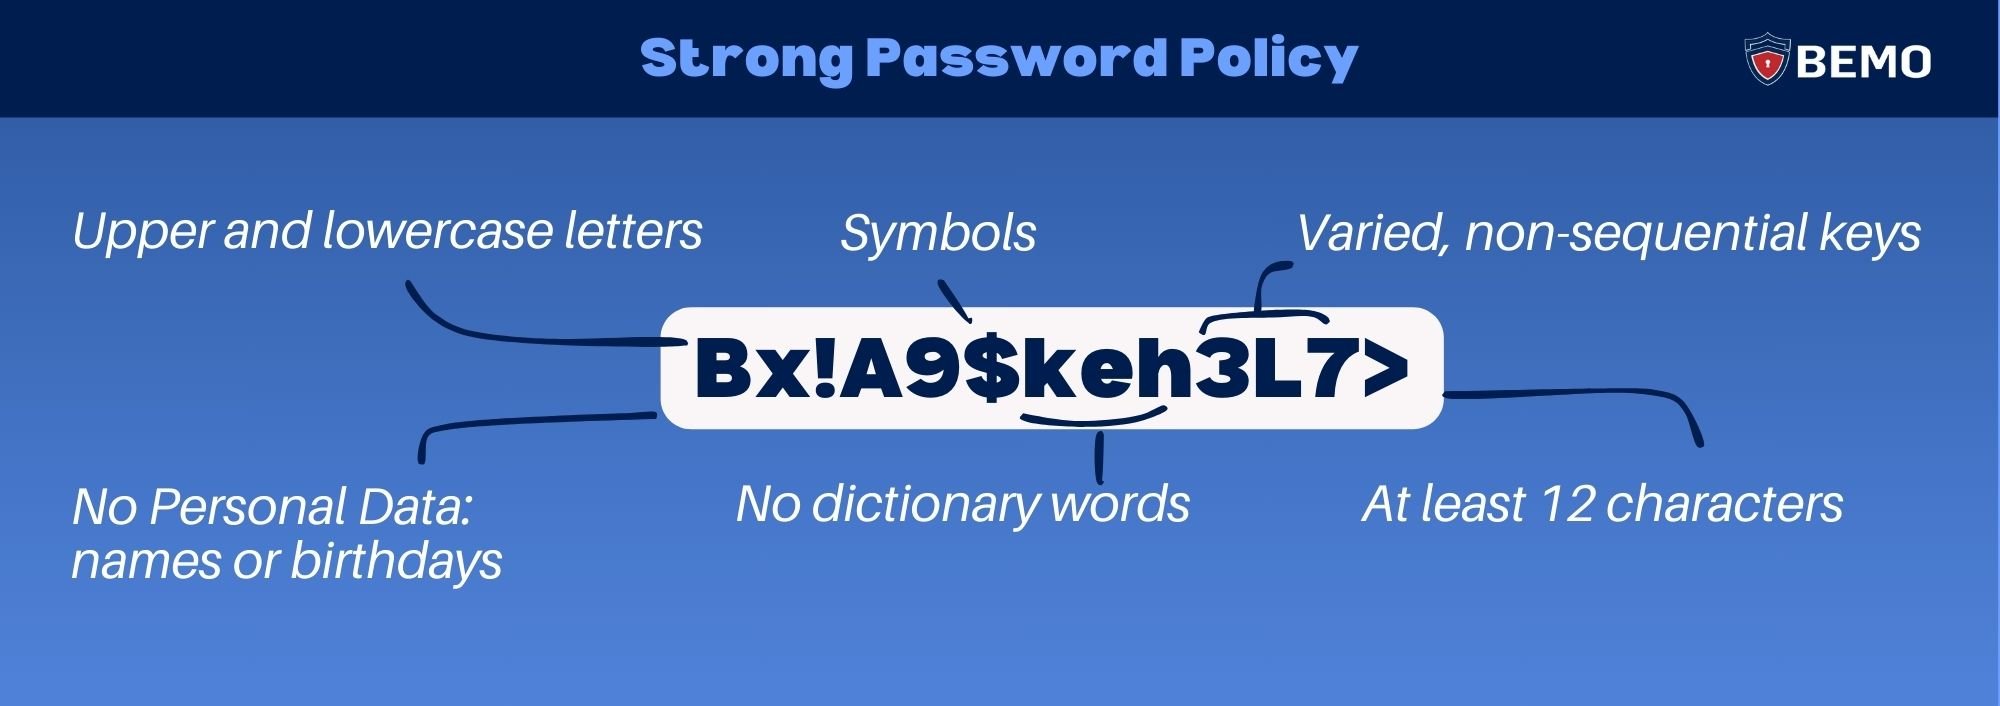 how secure is my password